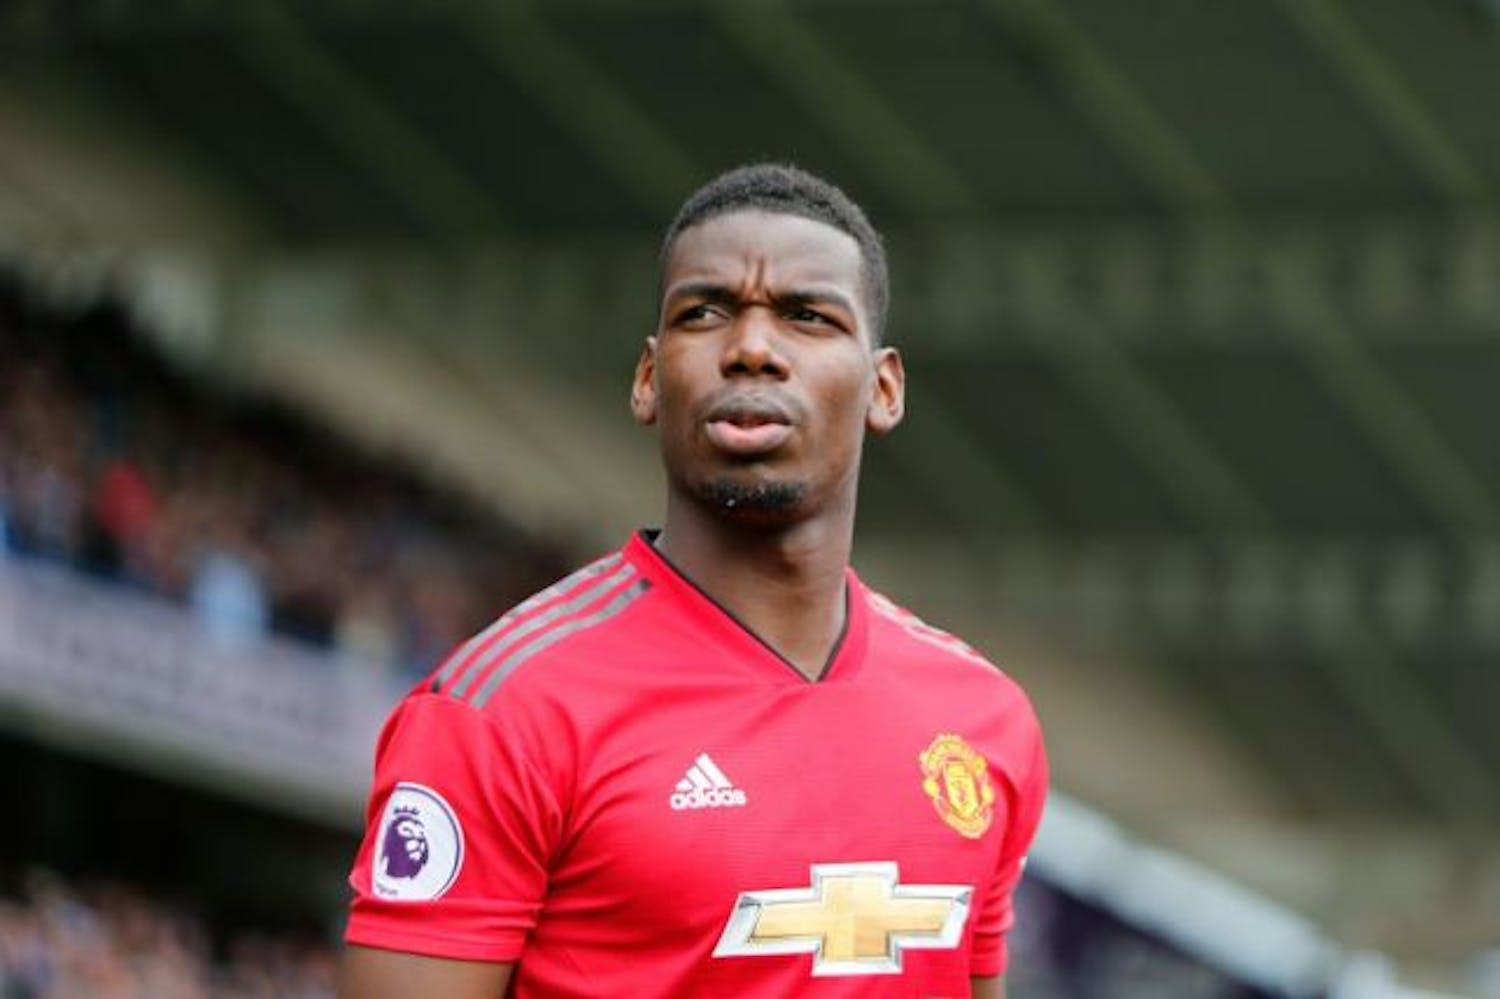 "I would have him out the door tomorrow" John Giles on Paul Pogba